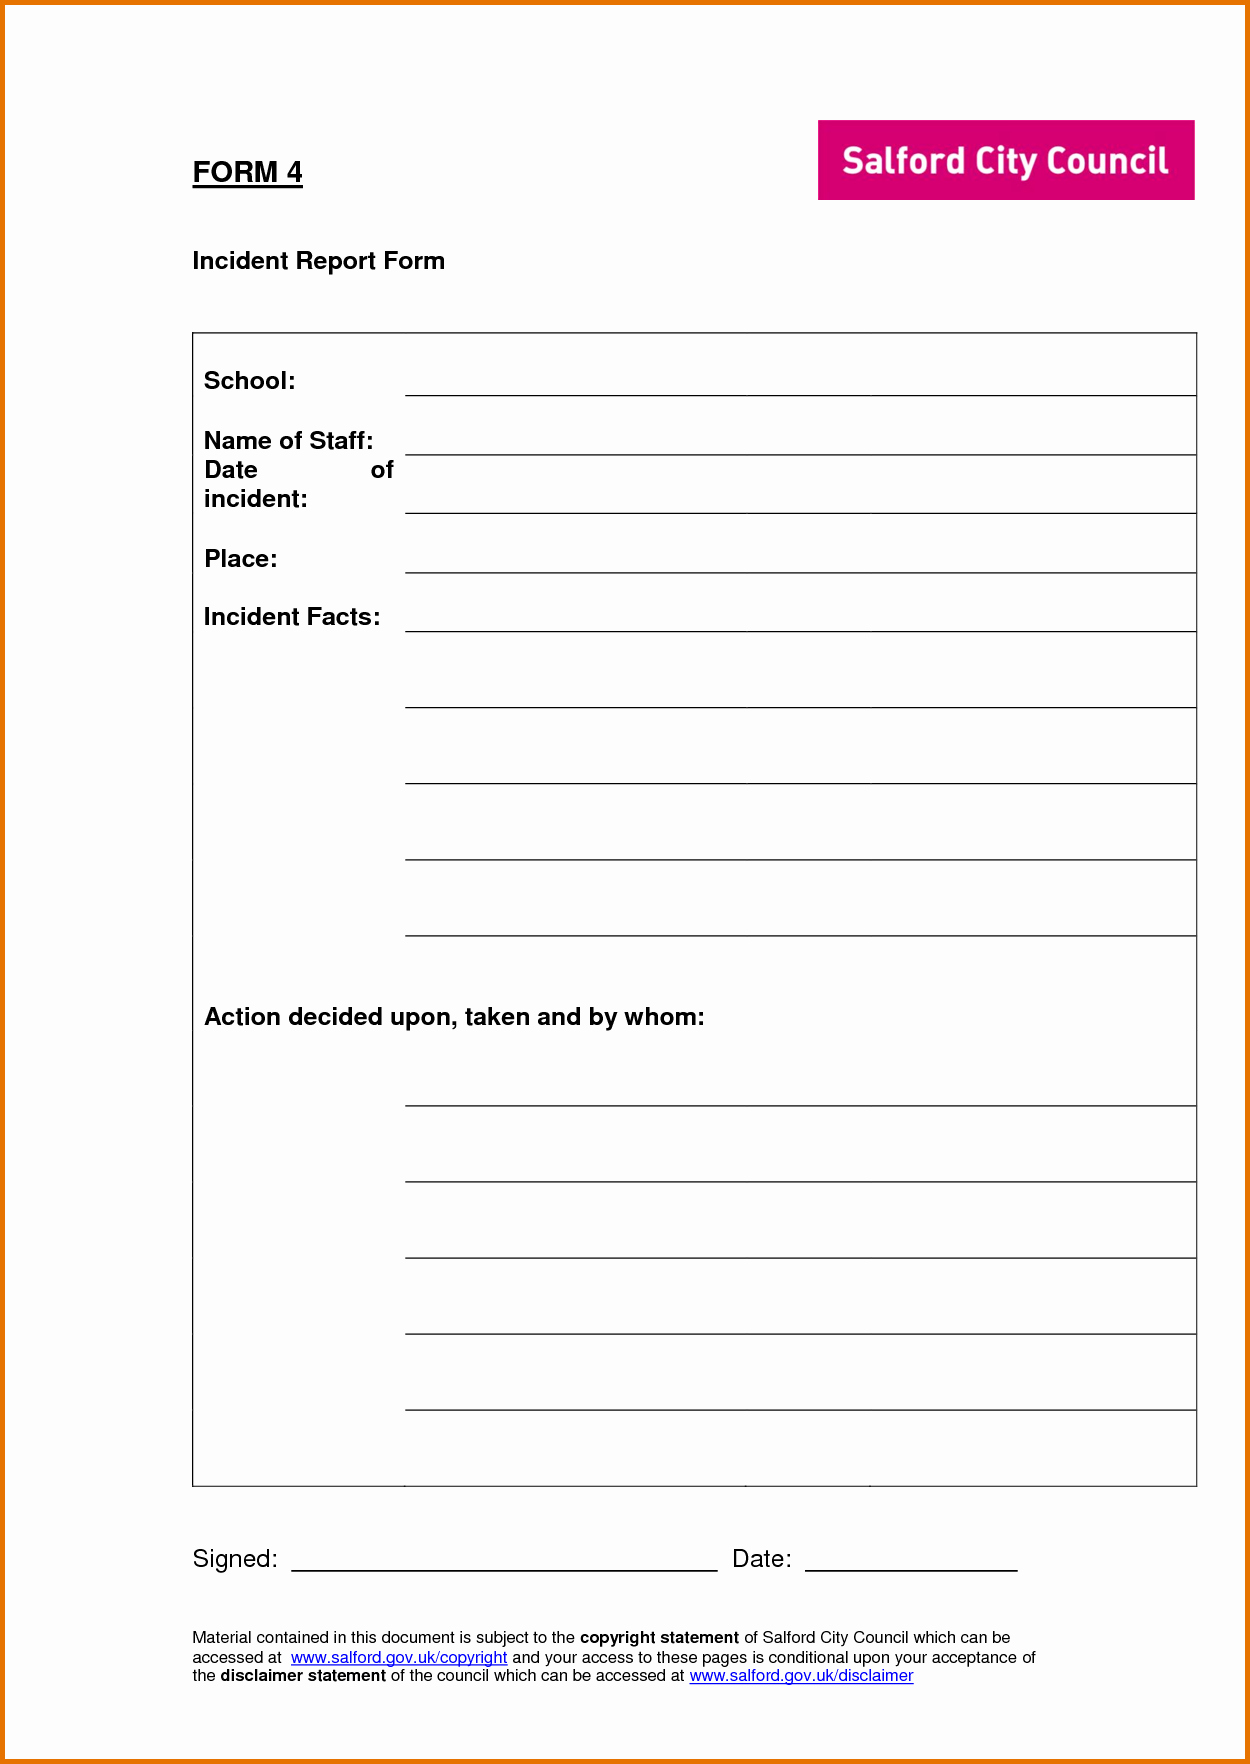 Incident Report Template Word New 8 Incident Report Template Wordreference Letters Words